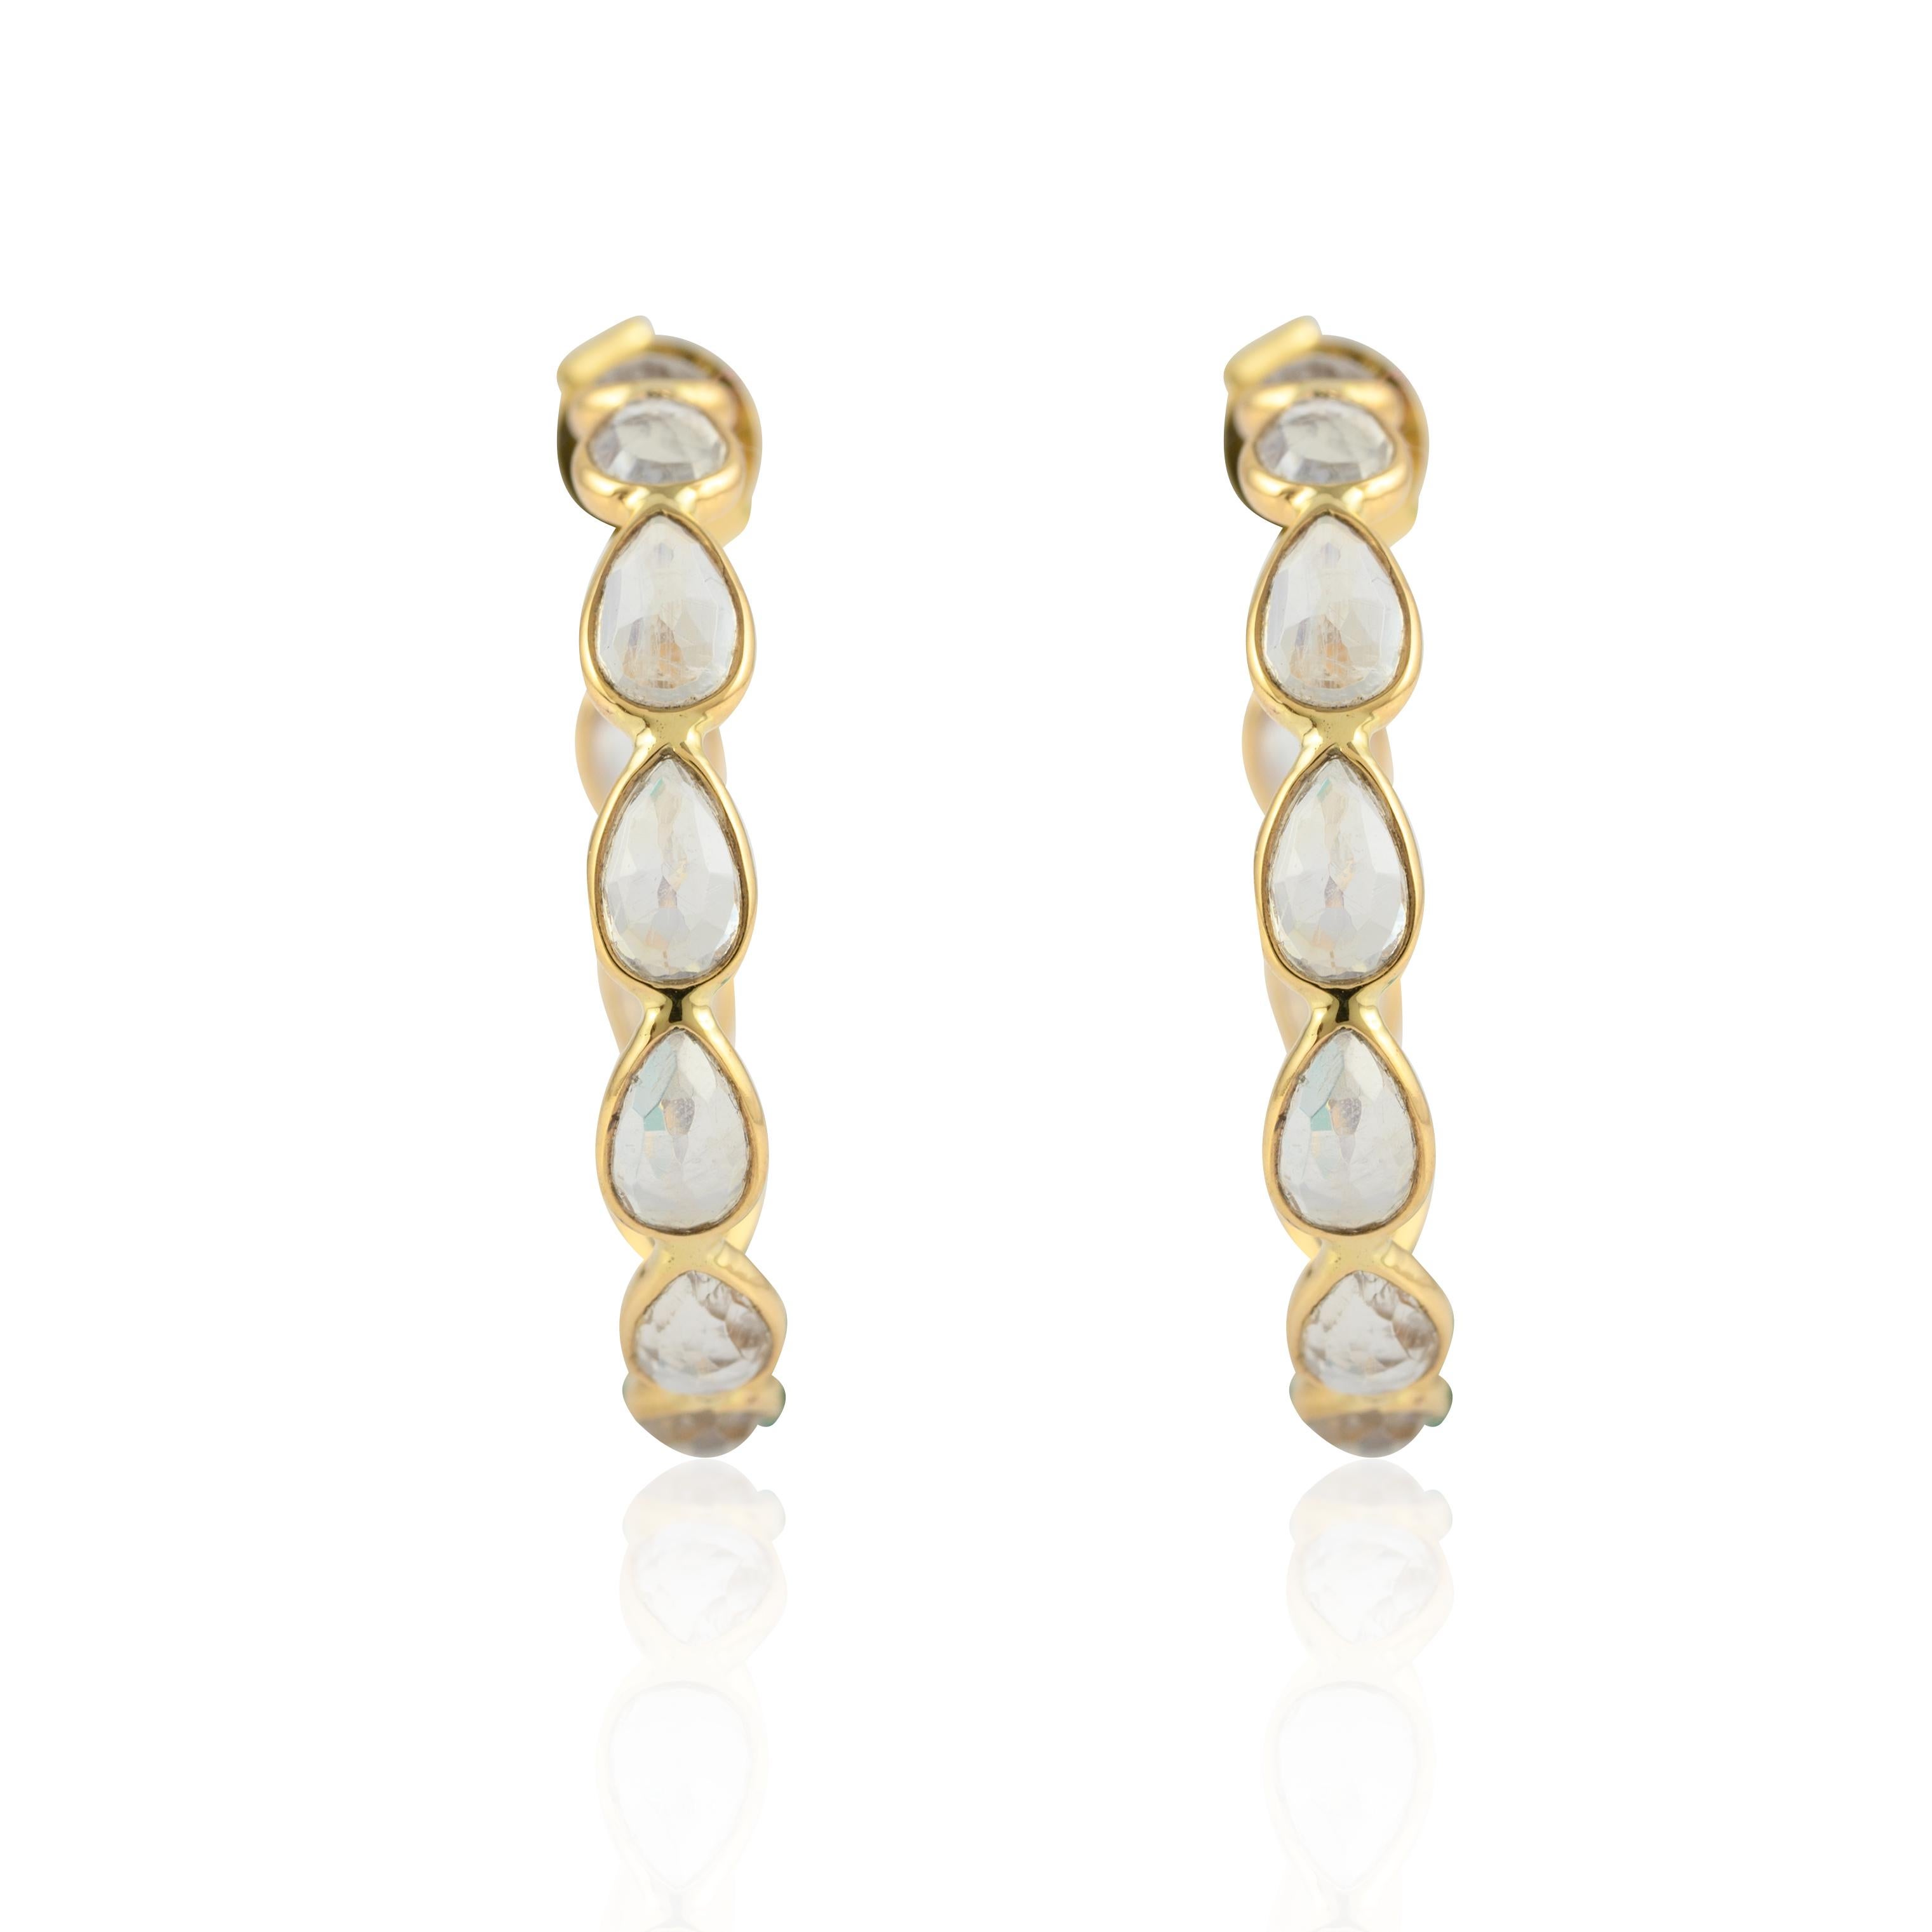 Contemporary Natural Rainbow Moonstone Hoop Earrings Mounted in Solid 14k Yellow Gold for Her For Sale